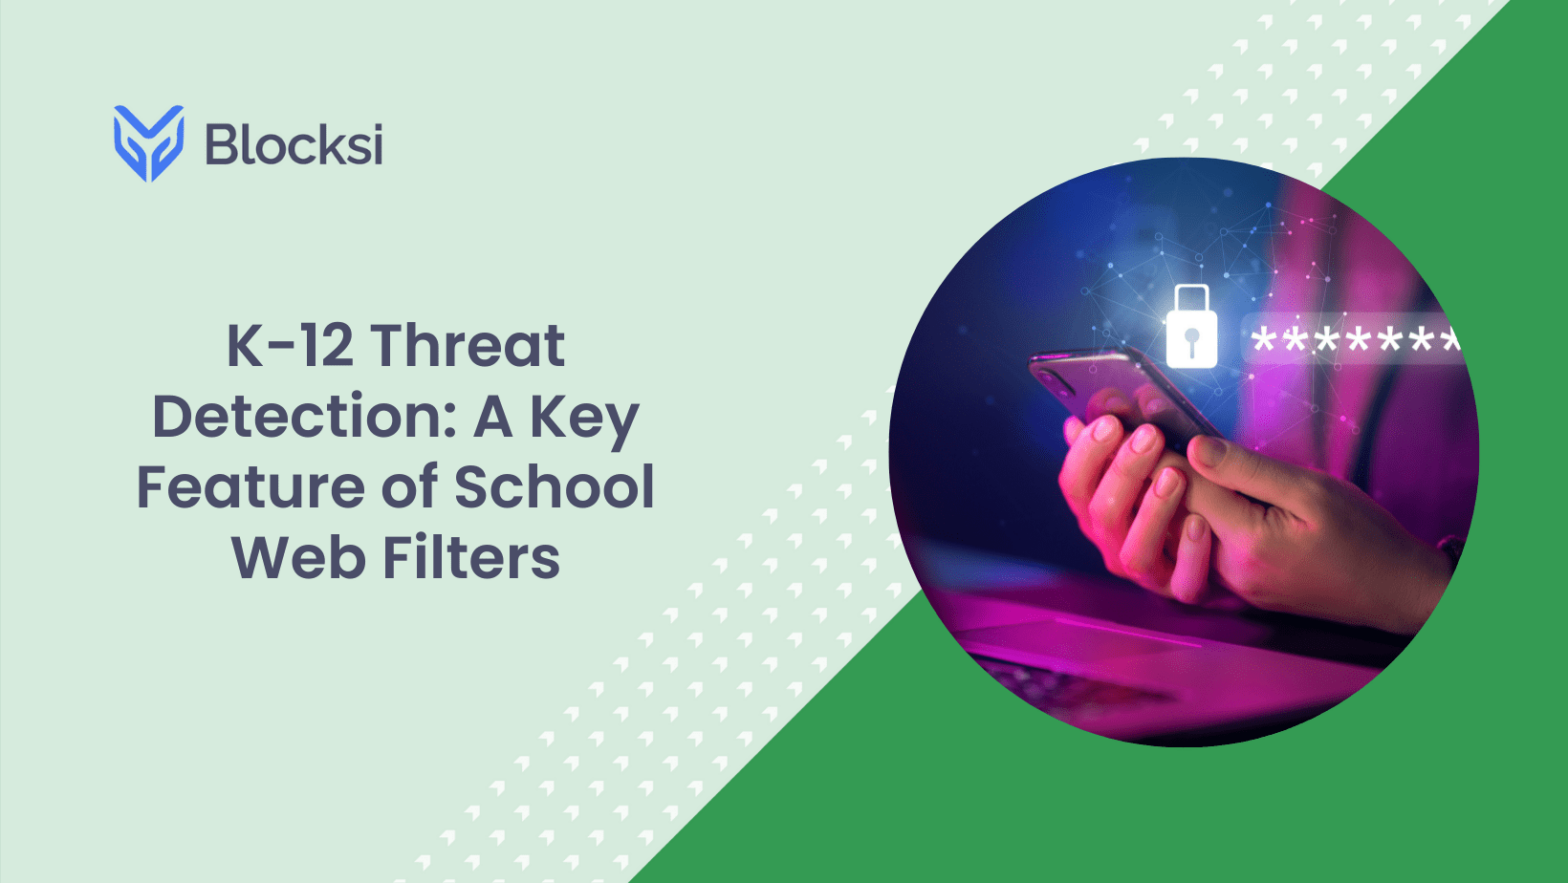 K-12 Threat Detection: A Key Feature of School Web Filters